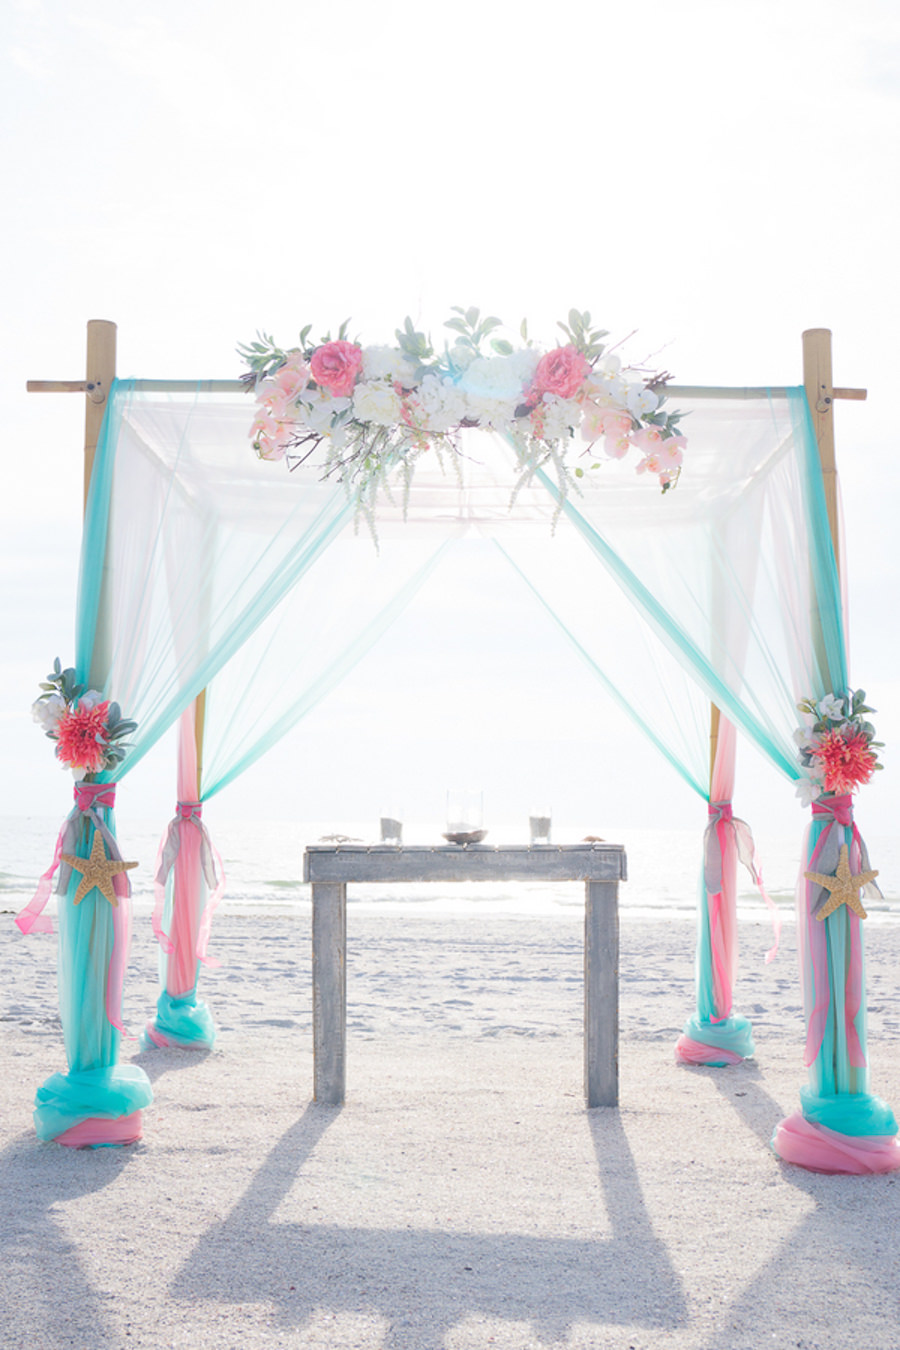 Beach, Waterfront Wedding Ceremony with Bamboo Altar and Pink and Teal Floral and Draping Accent Details | | St. Pete Beach Wedding Planners Tide the Knot Beach Weddings